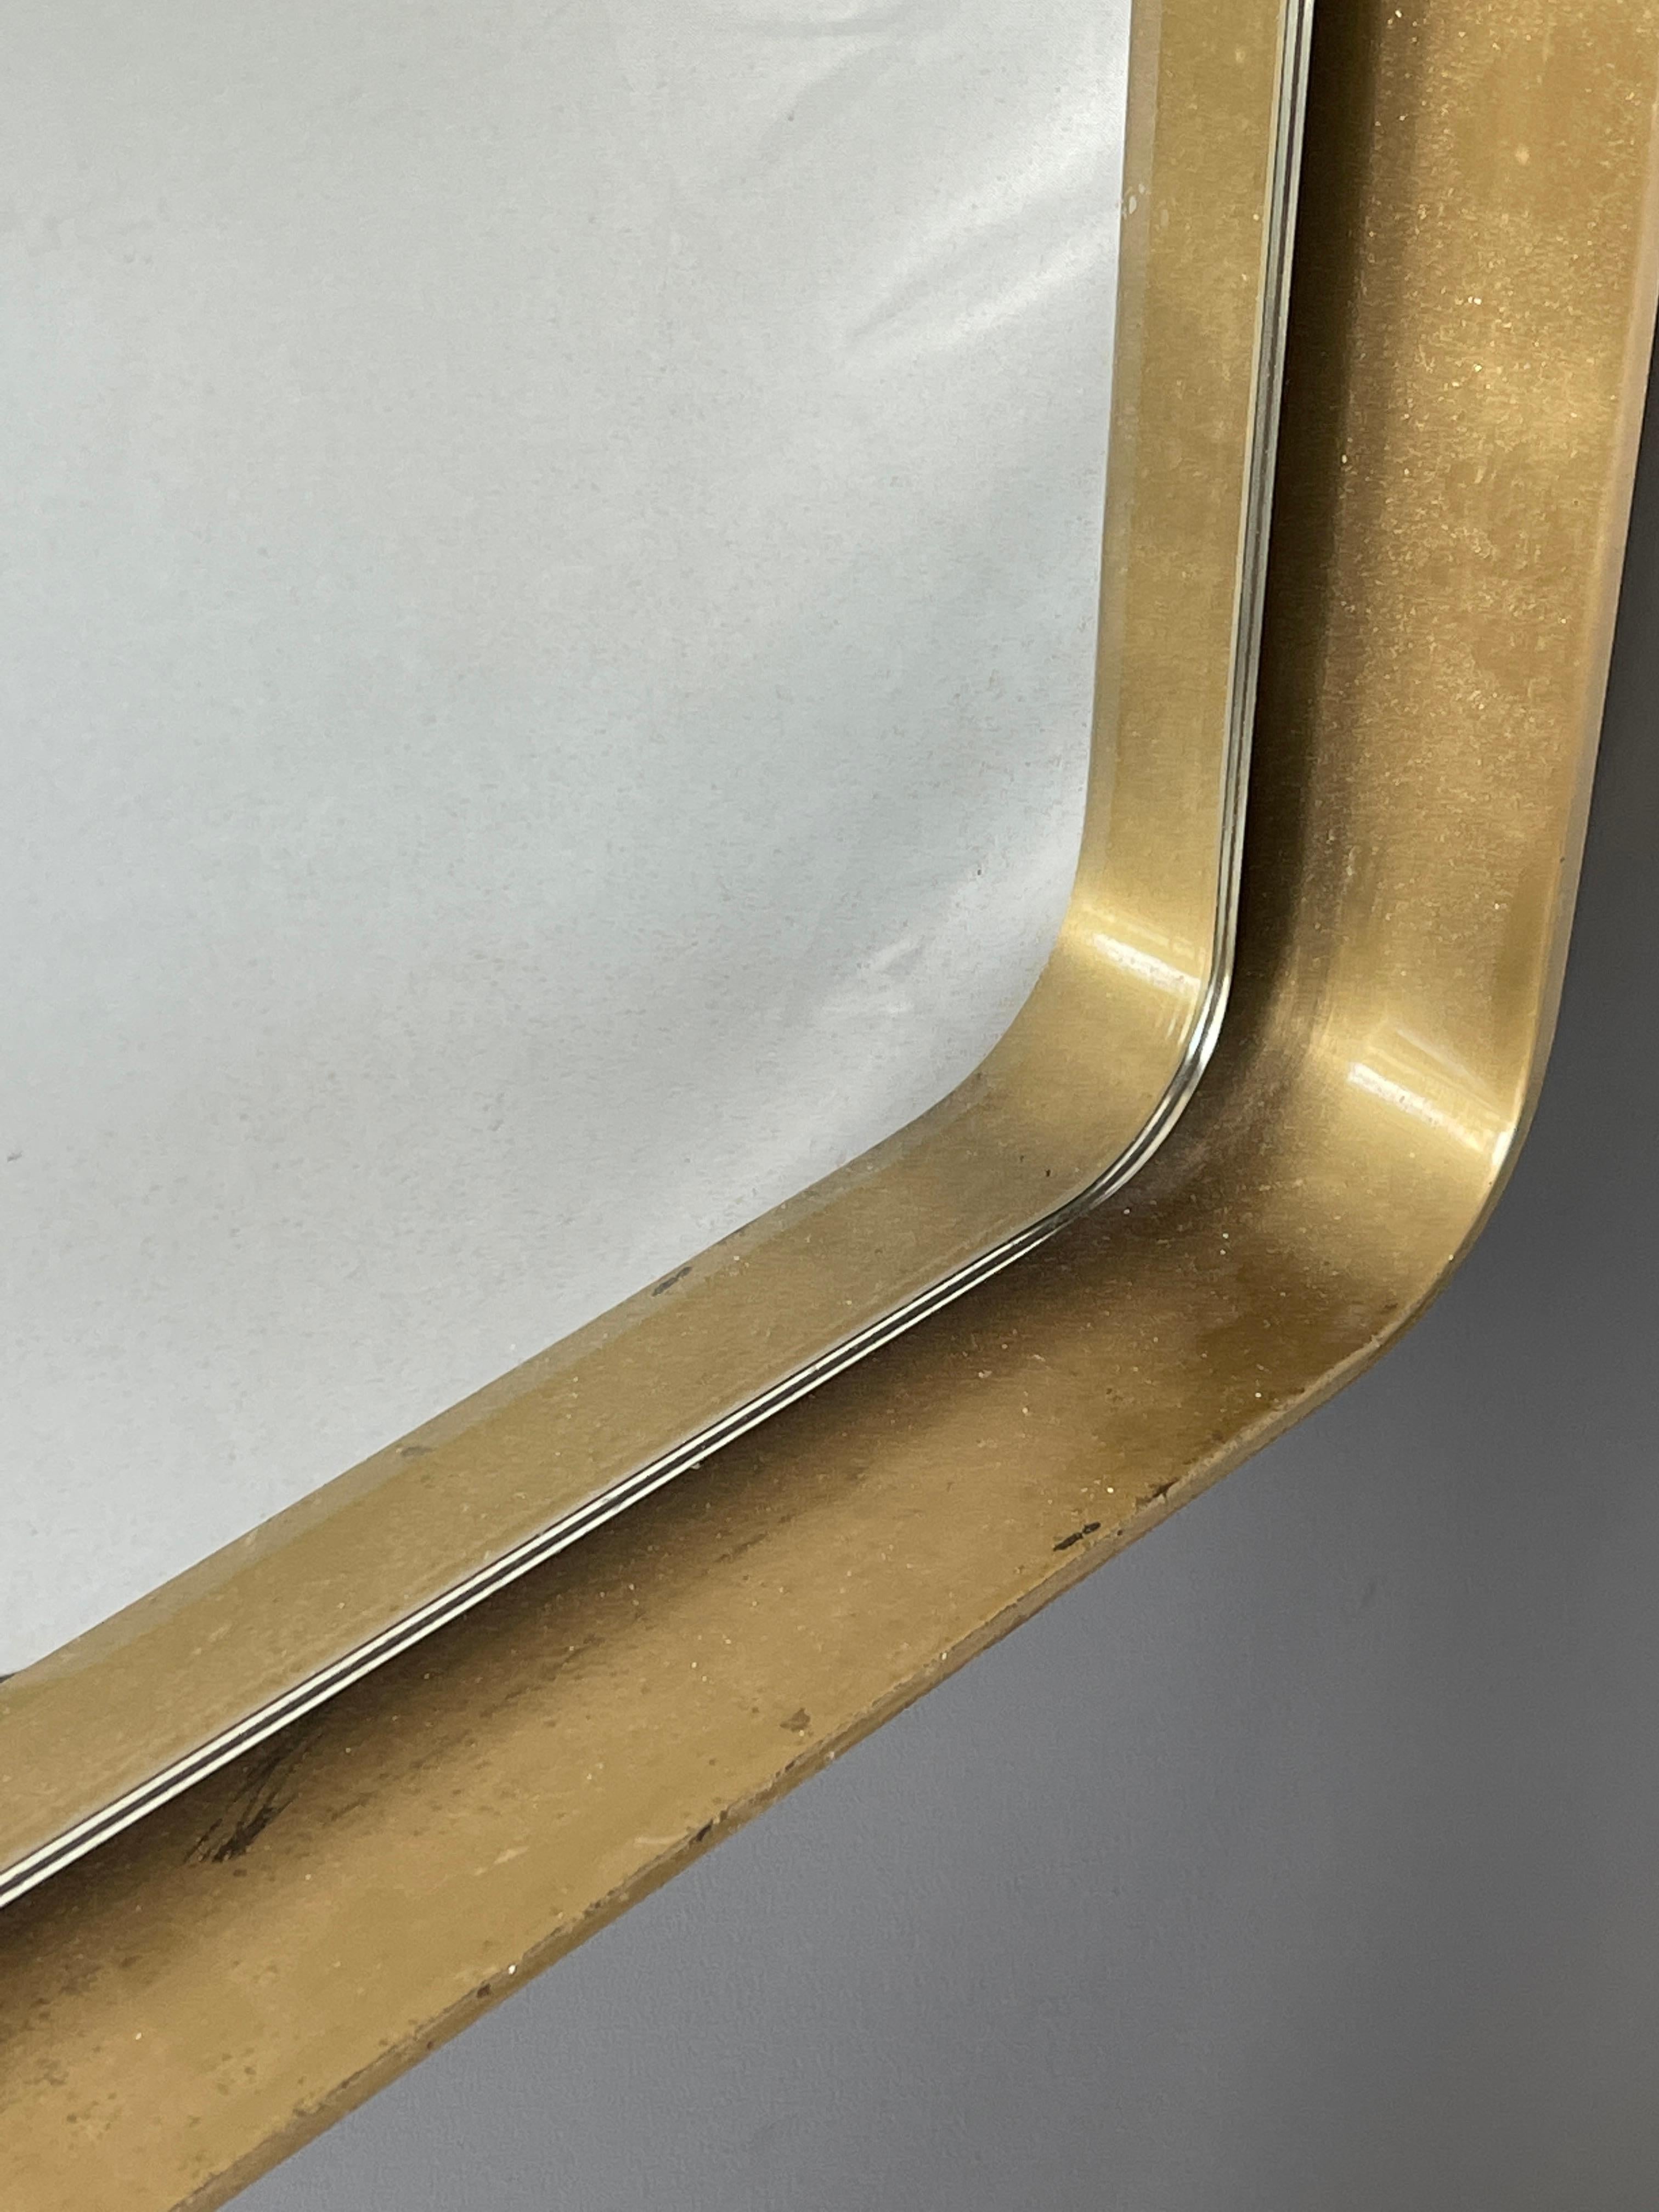 A wall mirror, produced in Italy, 1950s. Cut mirror glass is framed in brass frame. Work sourced in Italy.

Other designers of the period include Gio Ponti, Fontana Arte, Paolo Buffa, Franco Albini, and Jean Royere.